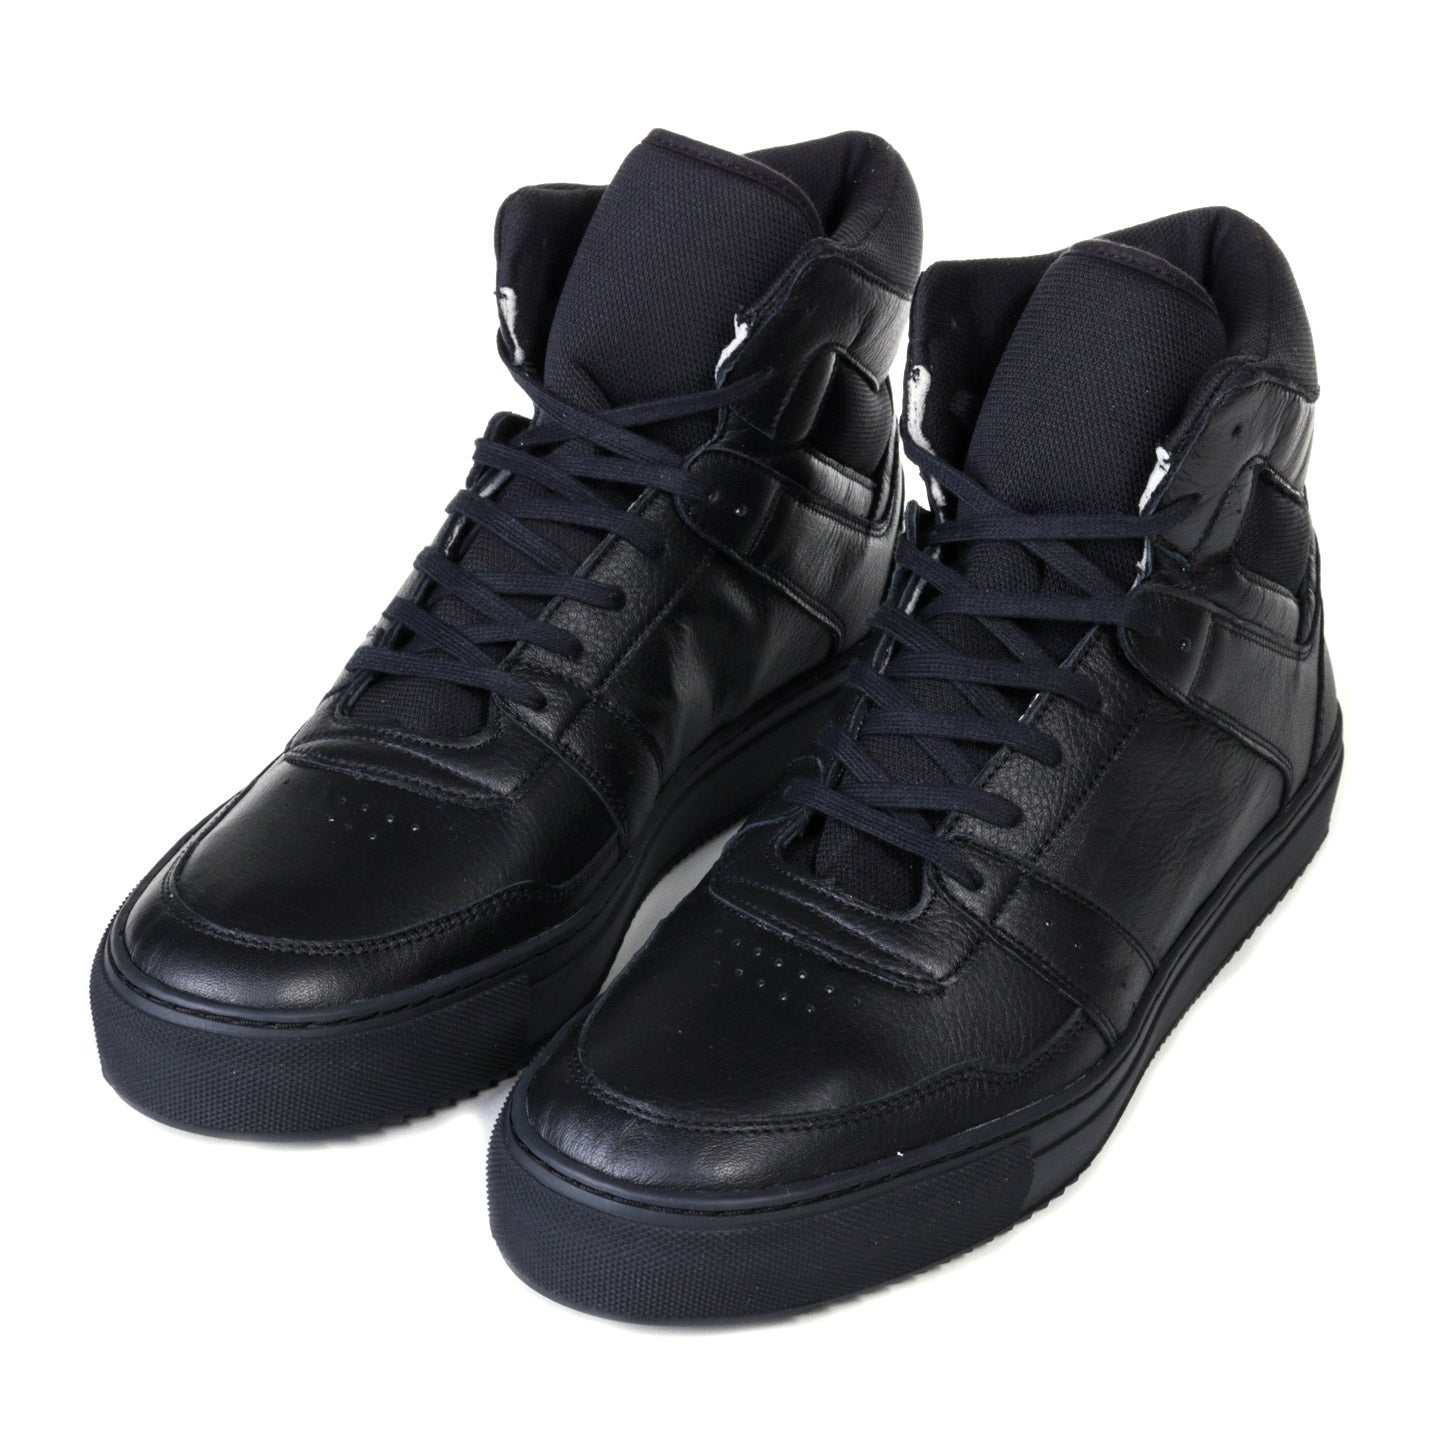 REPRODUCTION OF FOUND ITALIAN MILITARY TRAINER BLACK